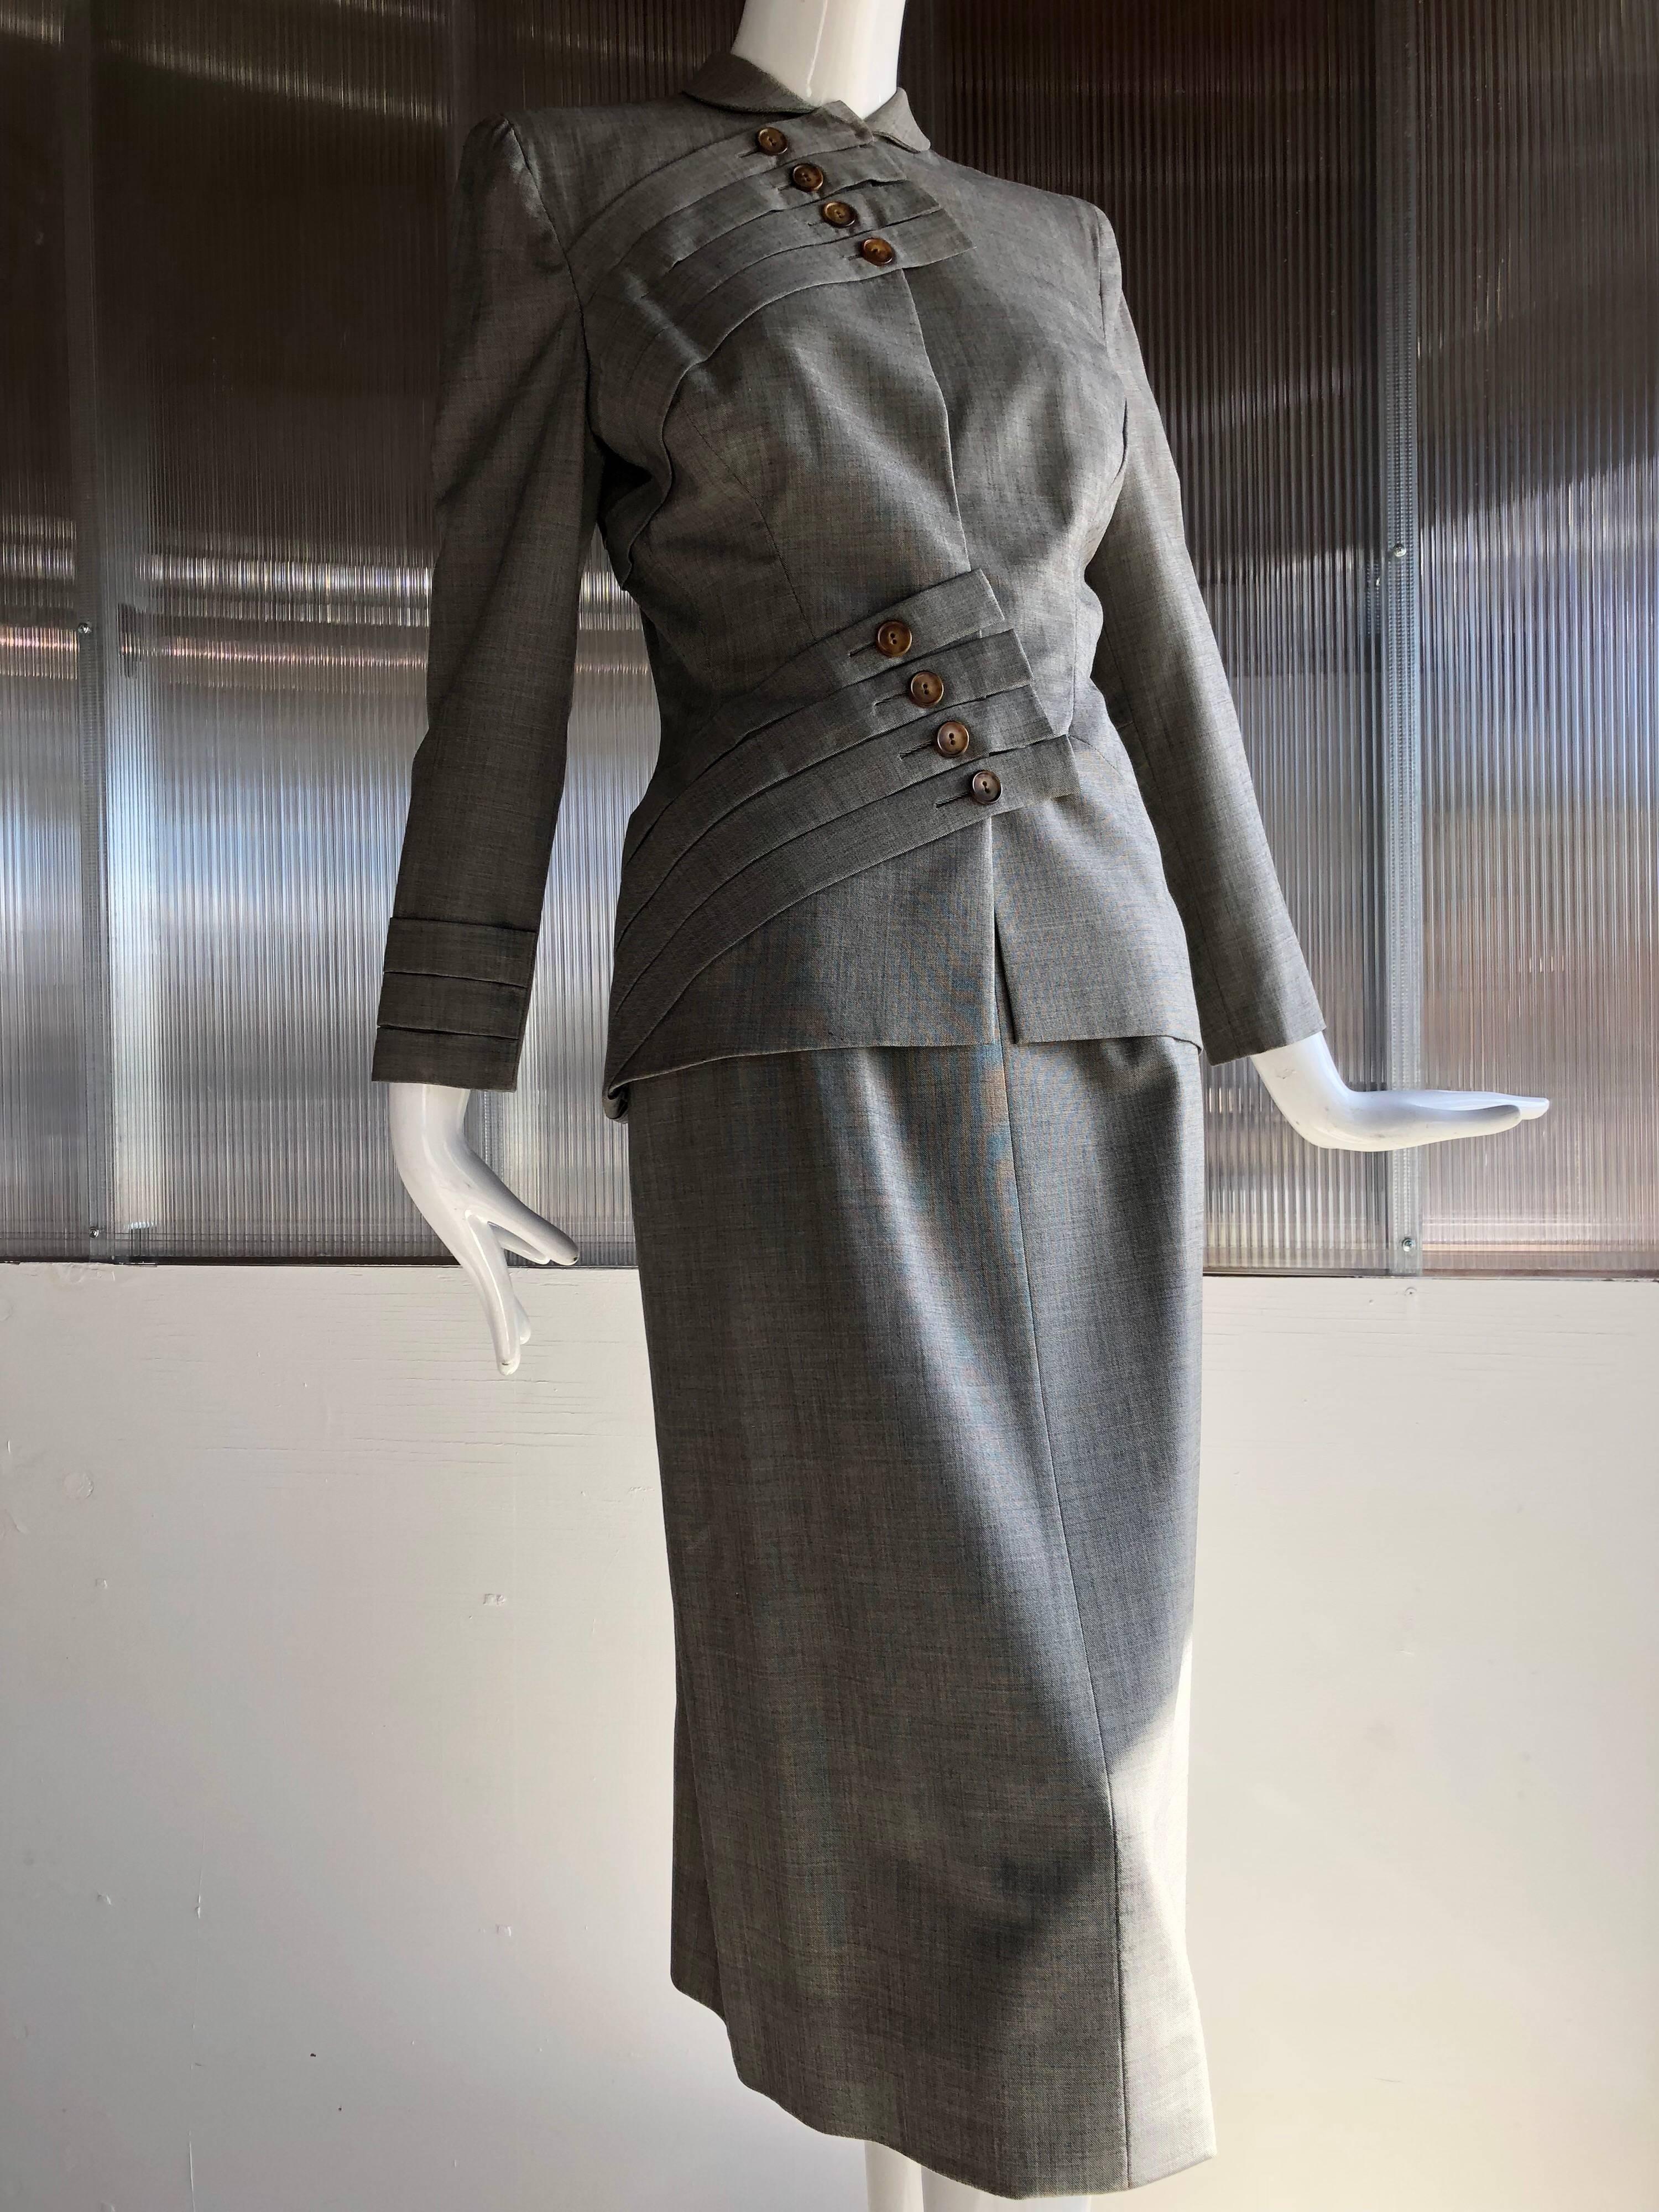 A spectacular 1940s Gilbert Adrian skirt suit created with typical Adrian panache!  Gray wool gabardine suiting is fashioned into a slew of button embellished straps that wrap over the bust on one side and the hip on the other.  Hidden hook and eye